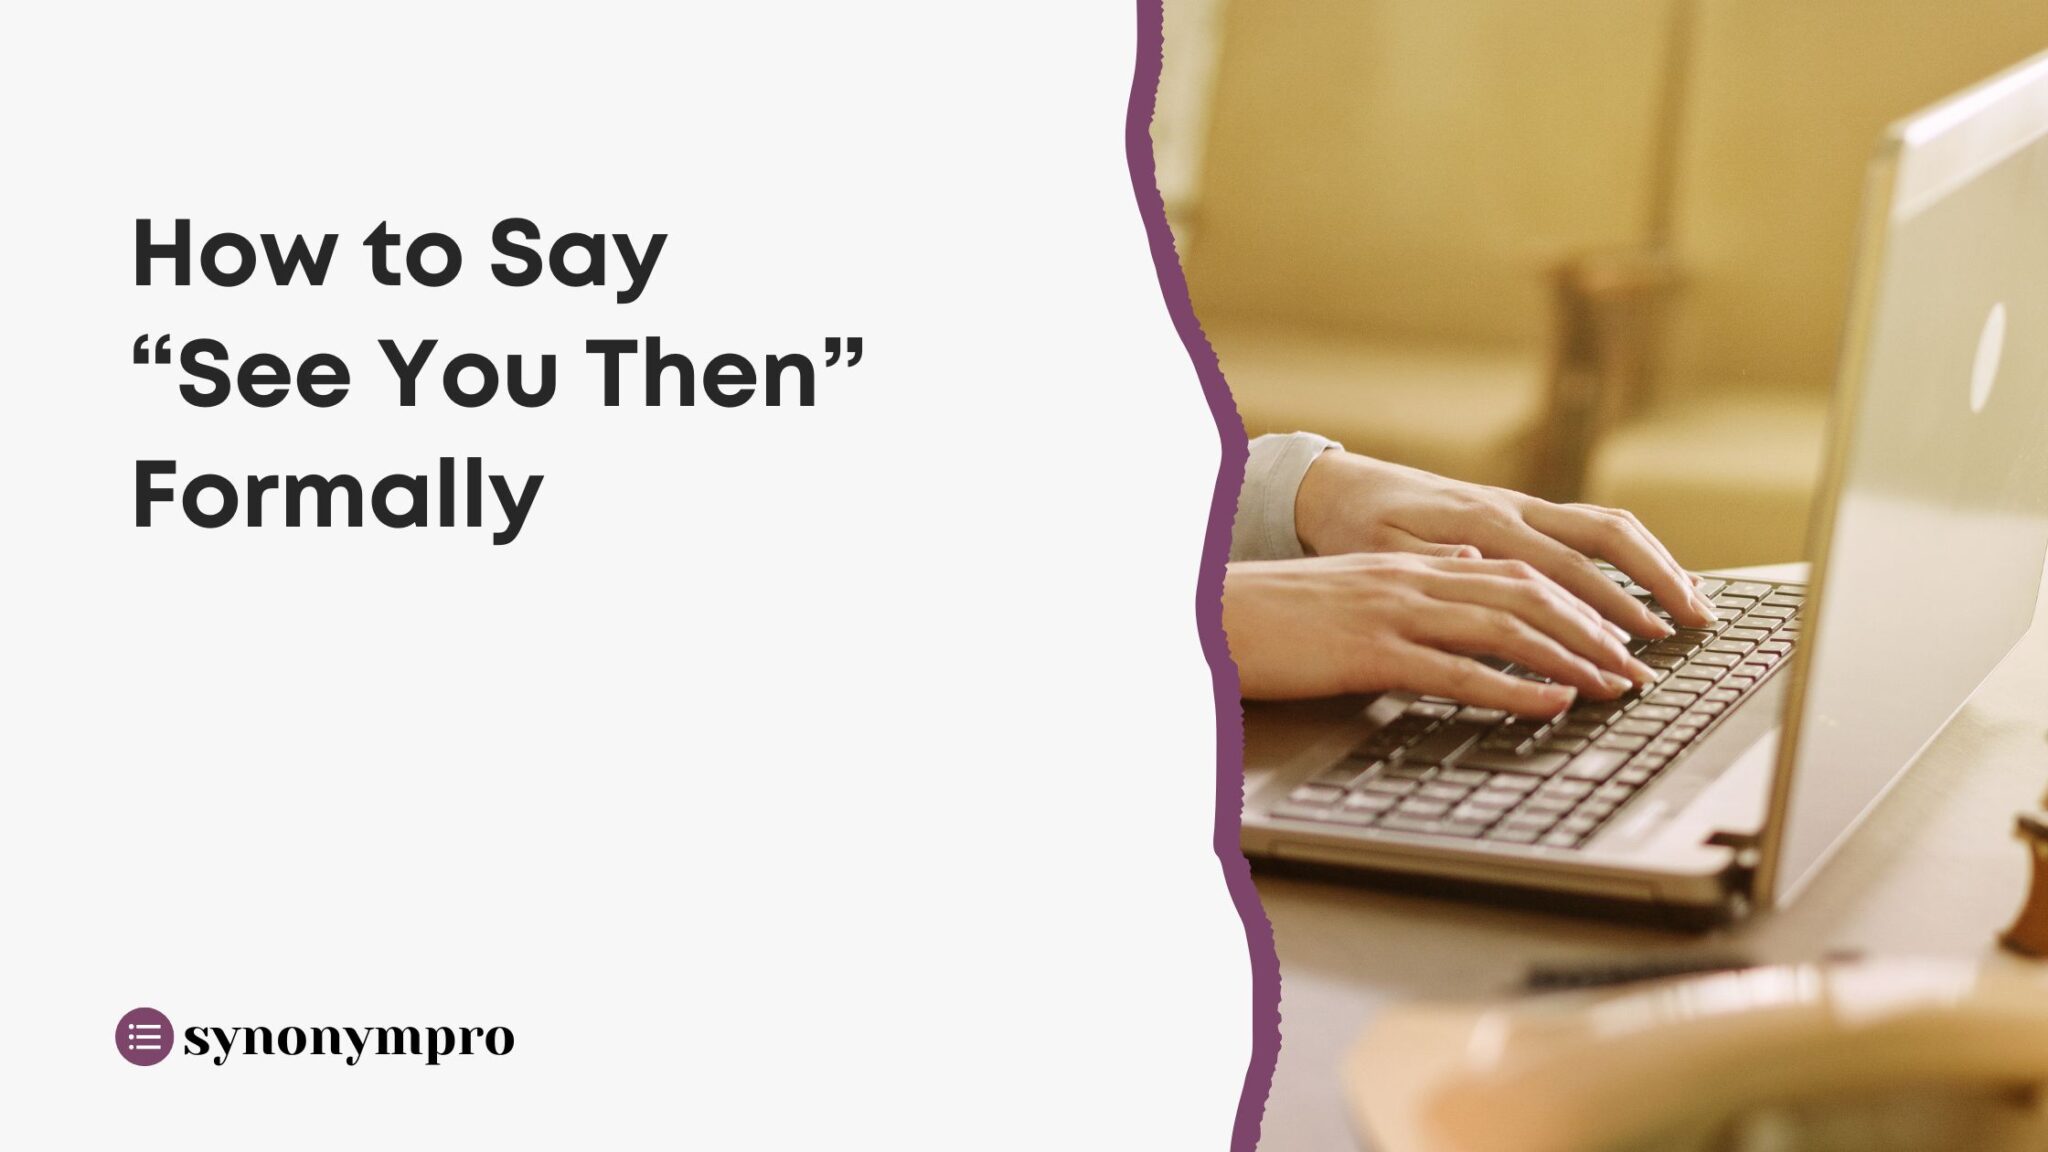 how-to-say-see-you-then-formally-synonympro